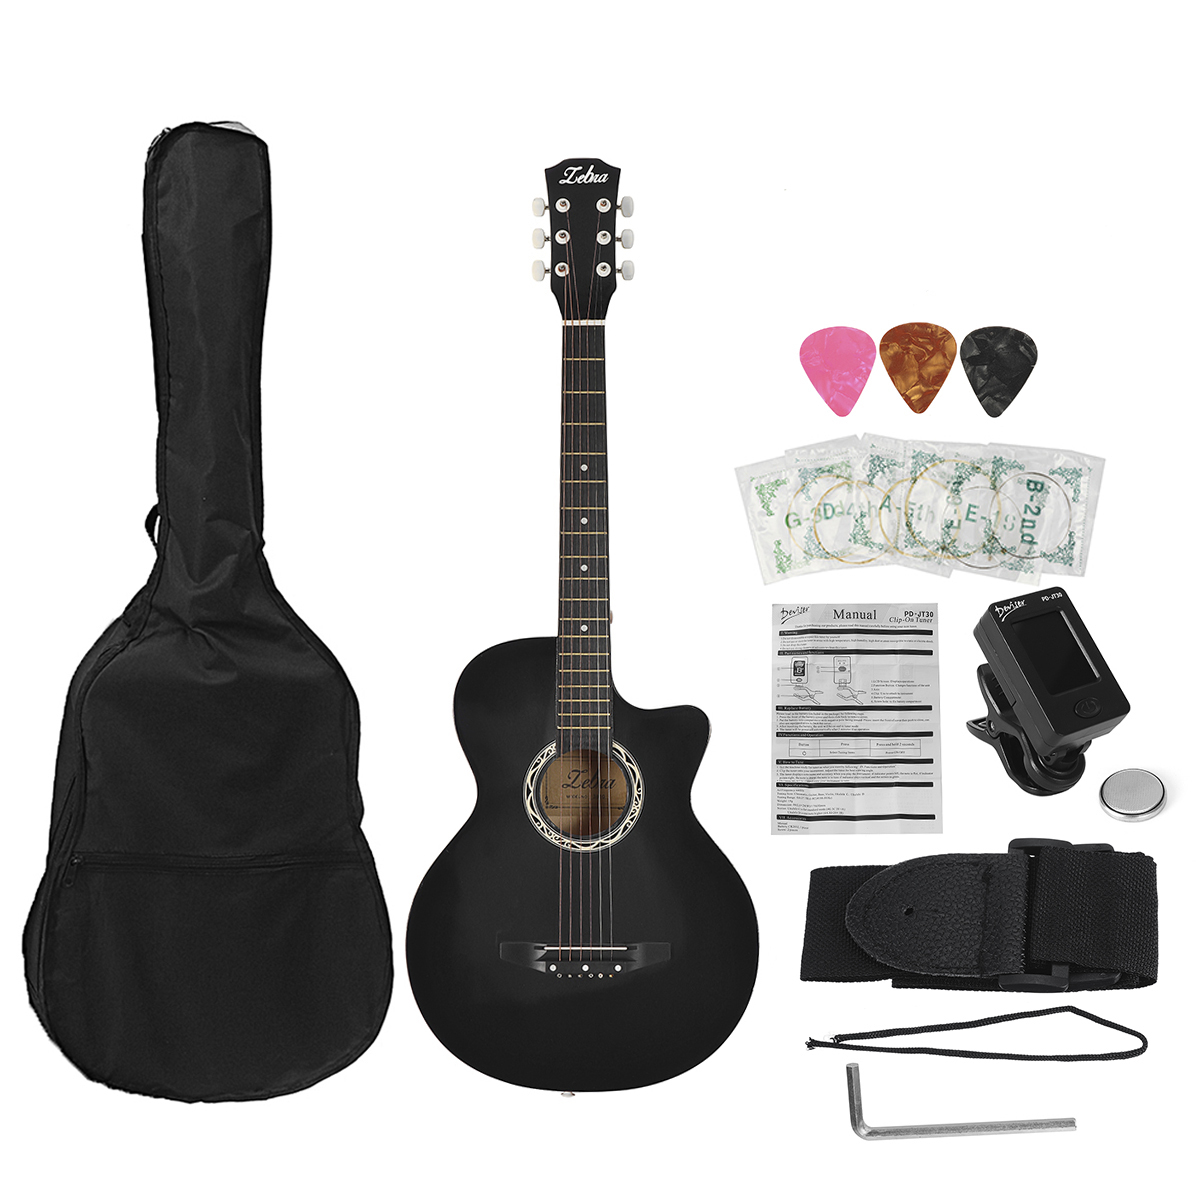 Zebra 38 Inch Classical Guitar Kit With 6 Strings Gig bag Tuner Picks Strap for Beginners Adults Kids Birthday Gift 2